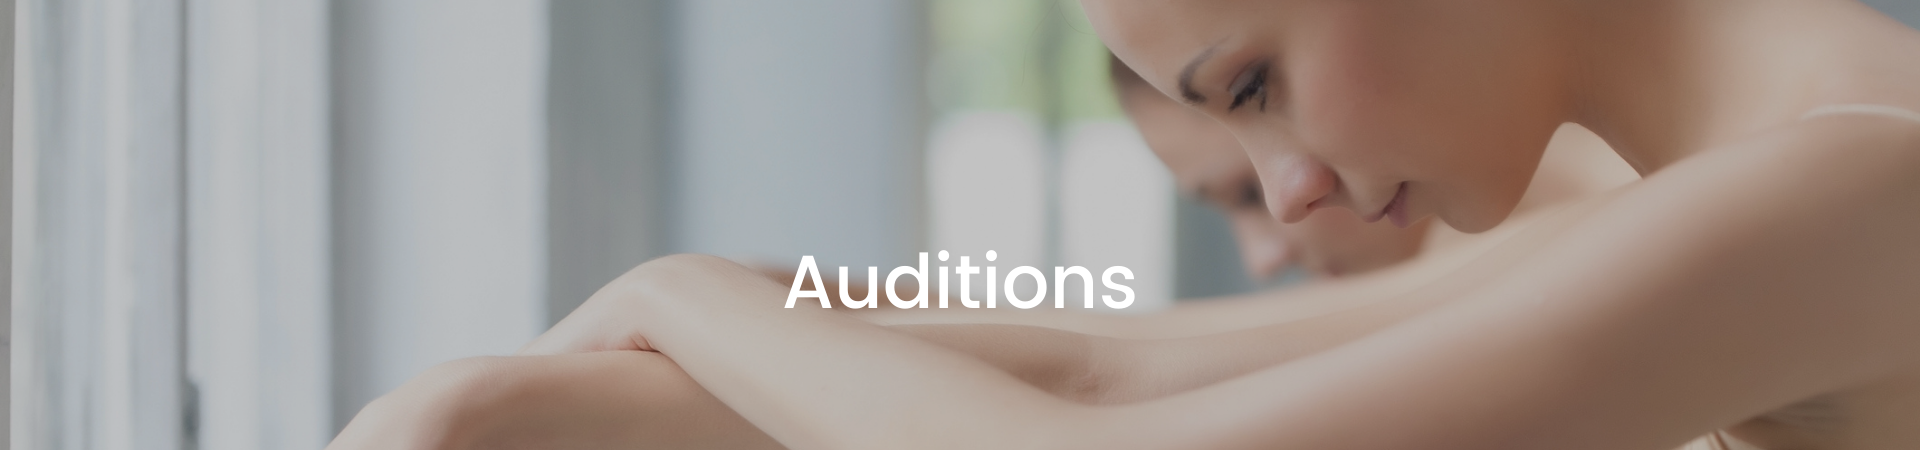 AUDITIONS FOR 2 DANCERS FOR PROJECTS WITH LOUISE REICHLIN & DANCERS/ LOS ANGELES CHOREOGRAPHERS & DANCERS